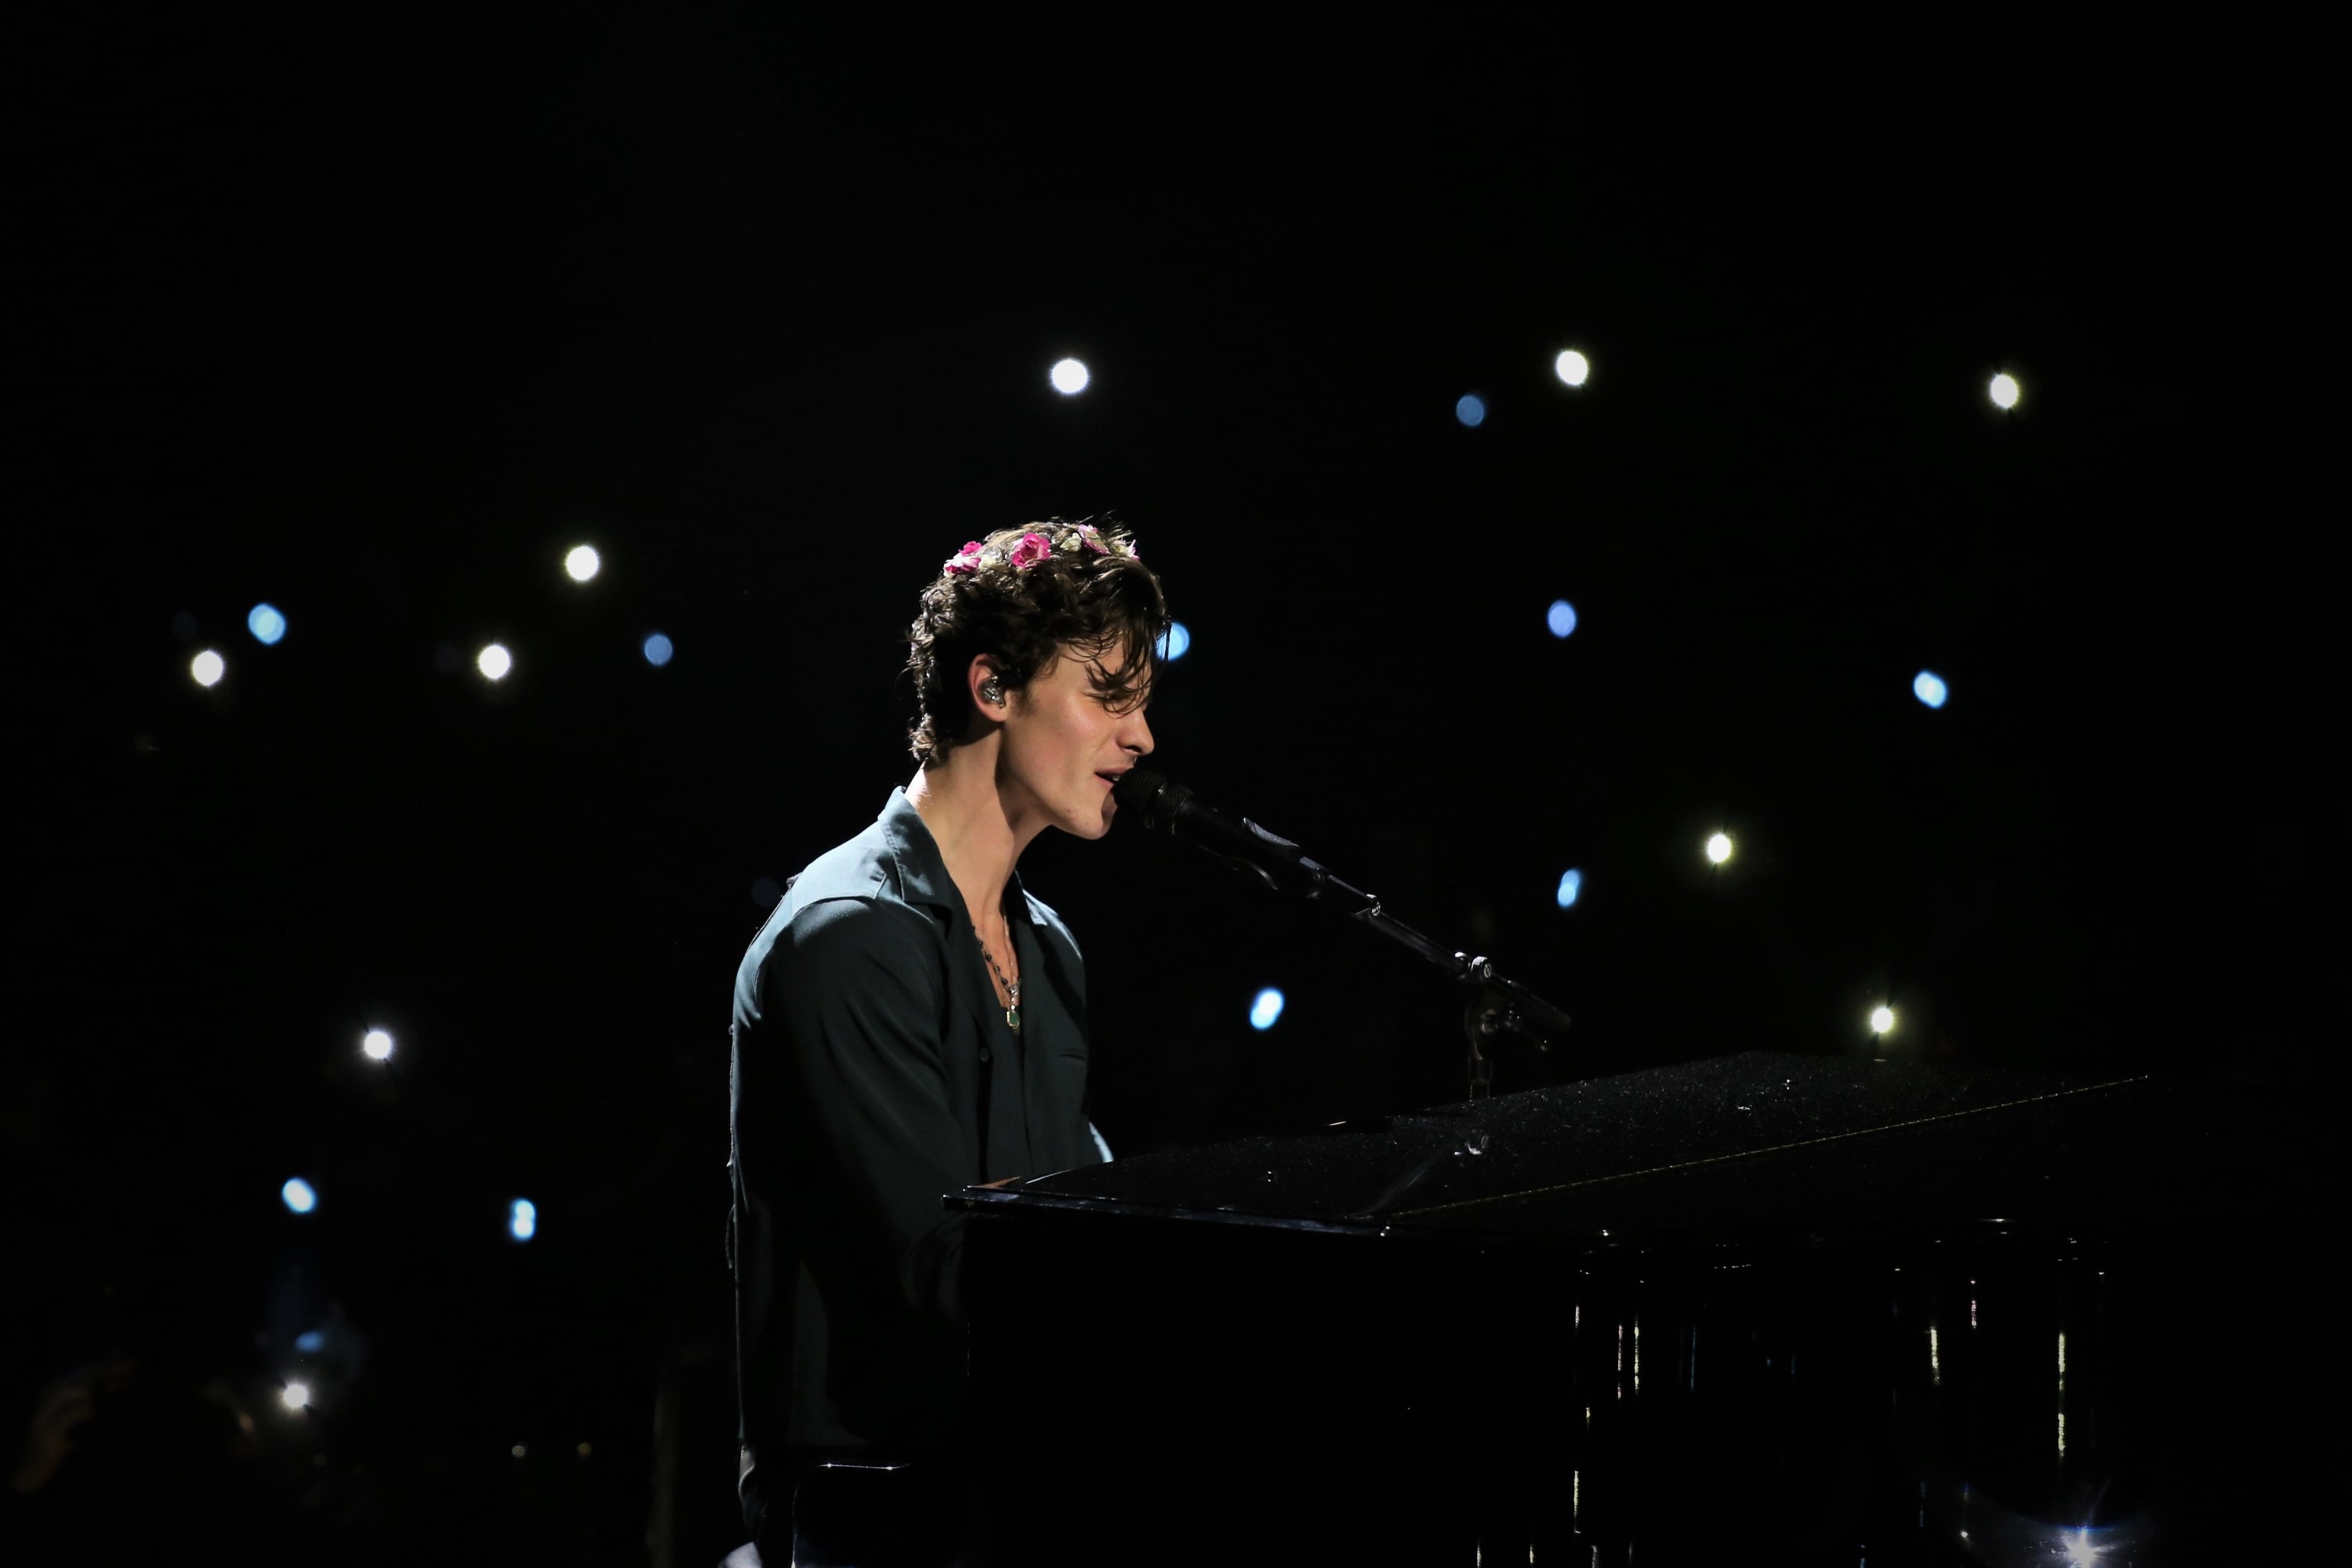 Shawn Mendes sings and plays his piano during a show at Arena Monterrey in Mexico